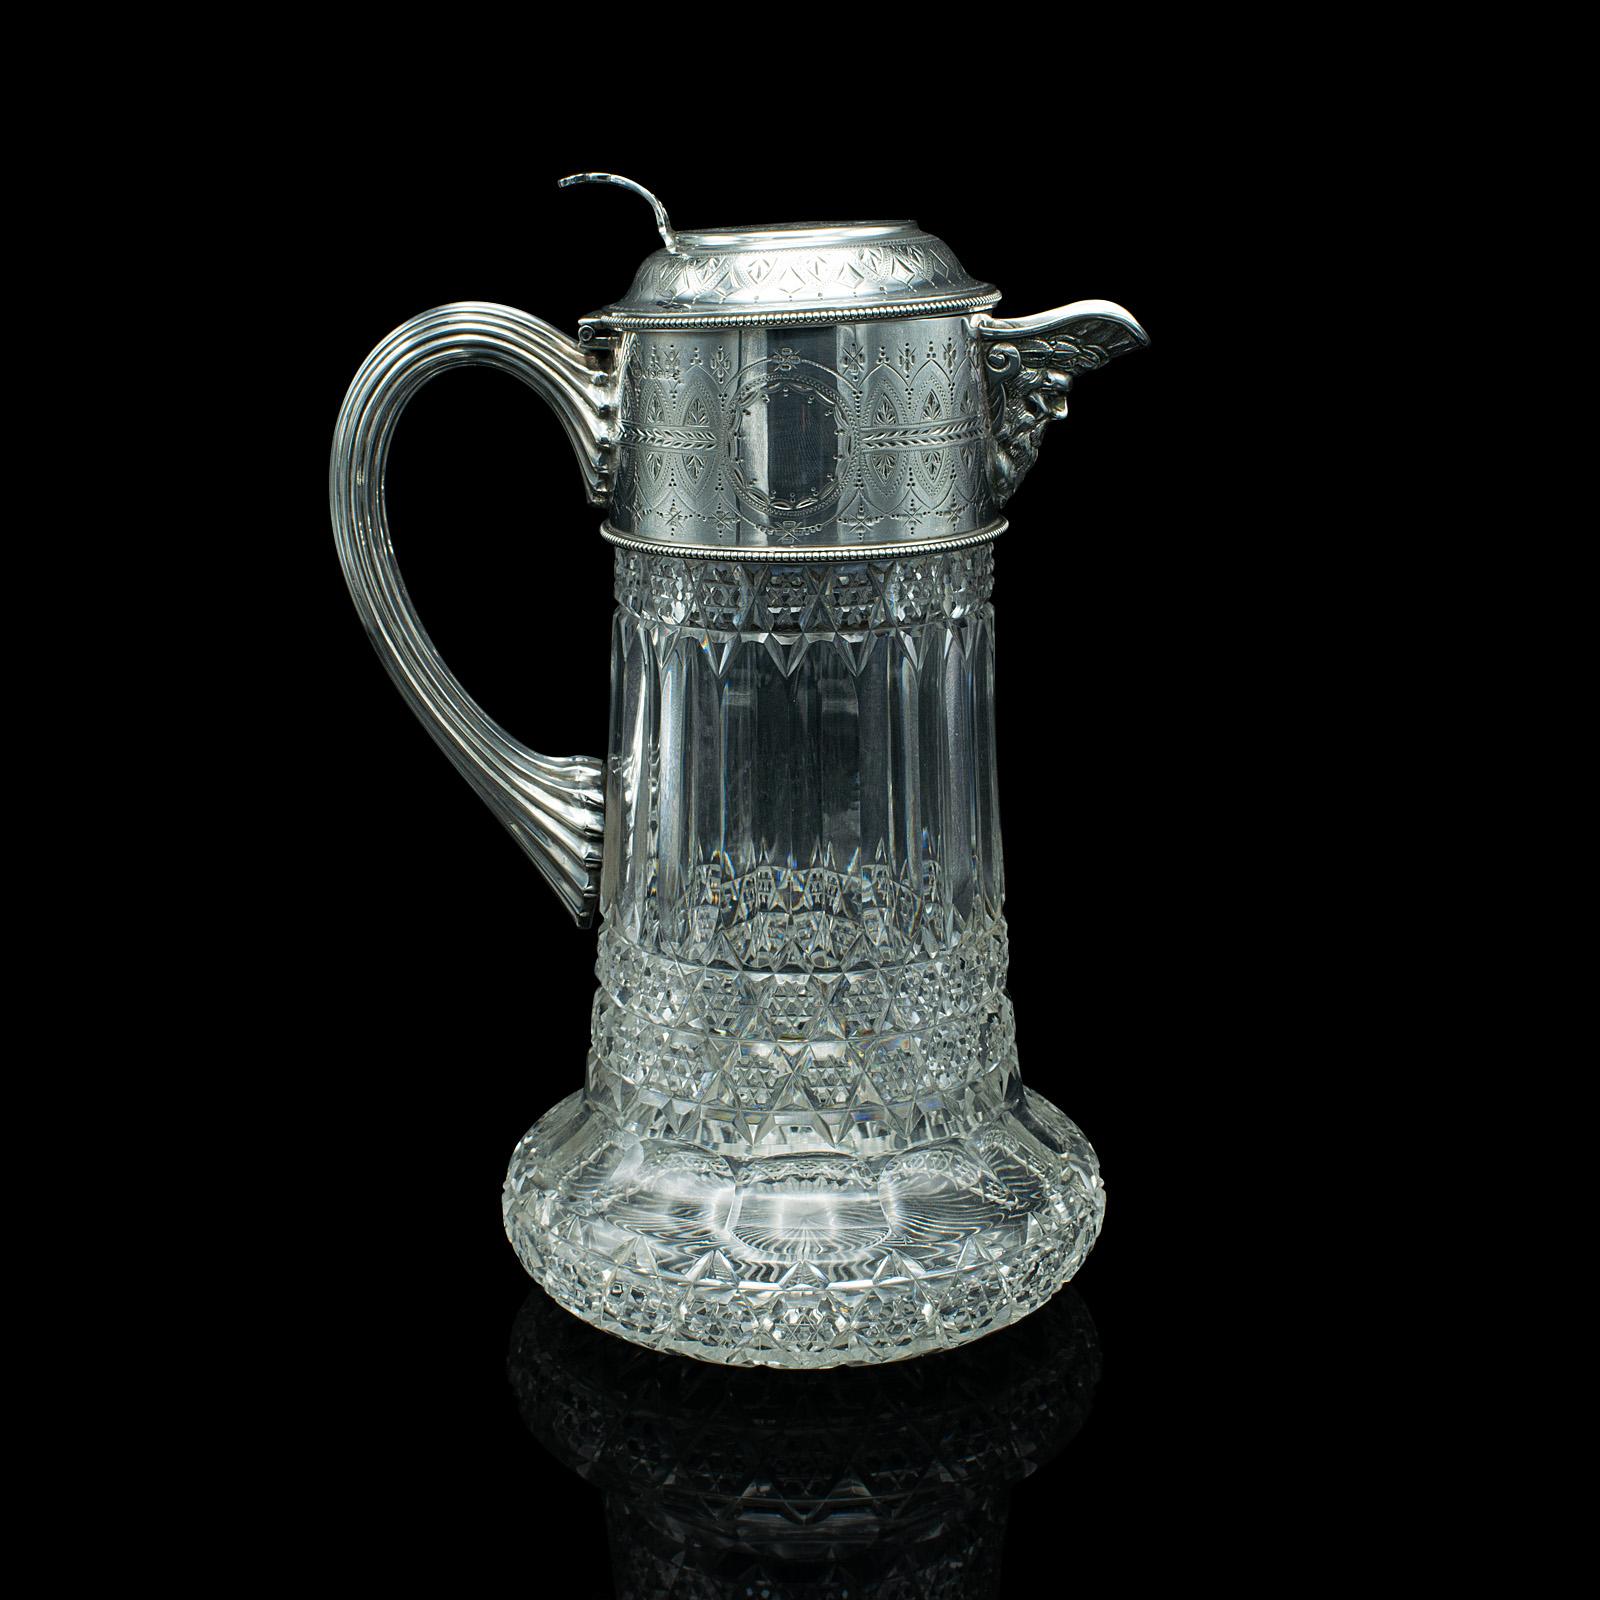 Late Victorian Antique Claret Jug, English, Cut Glass, Silver Plate, Decanter, Victorian, 1900 For Sale